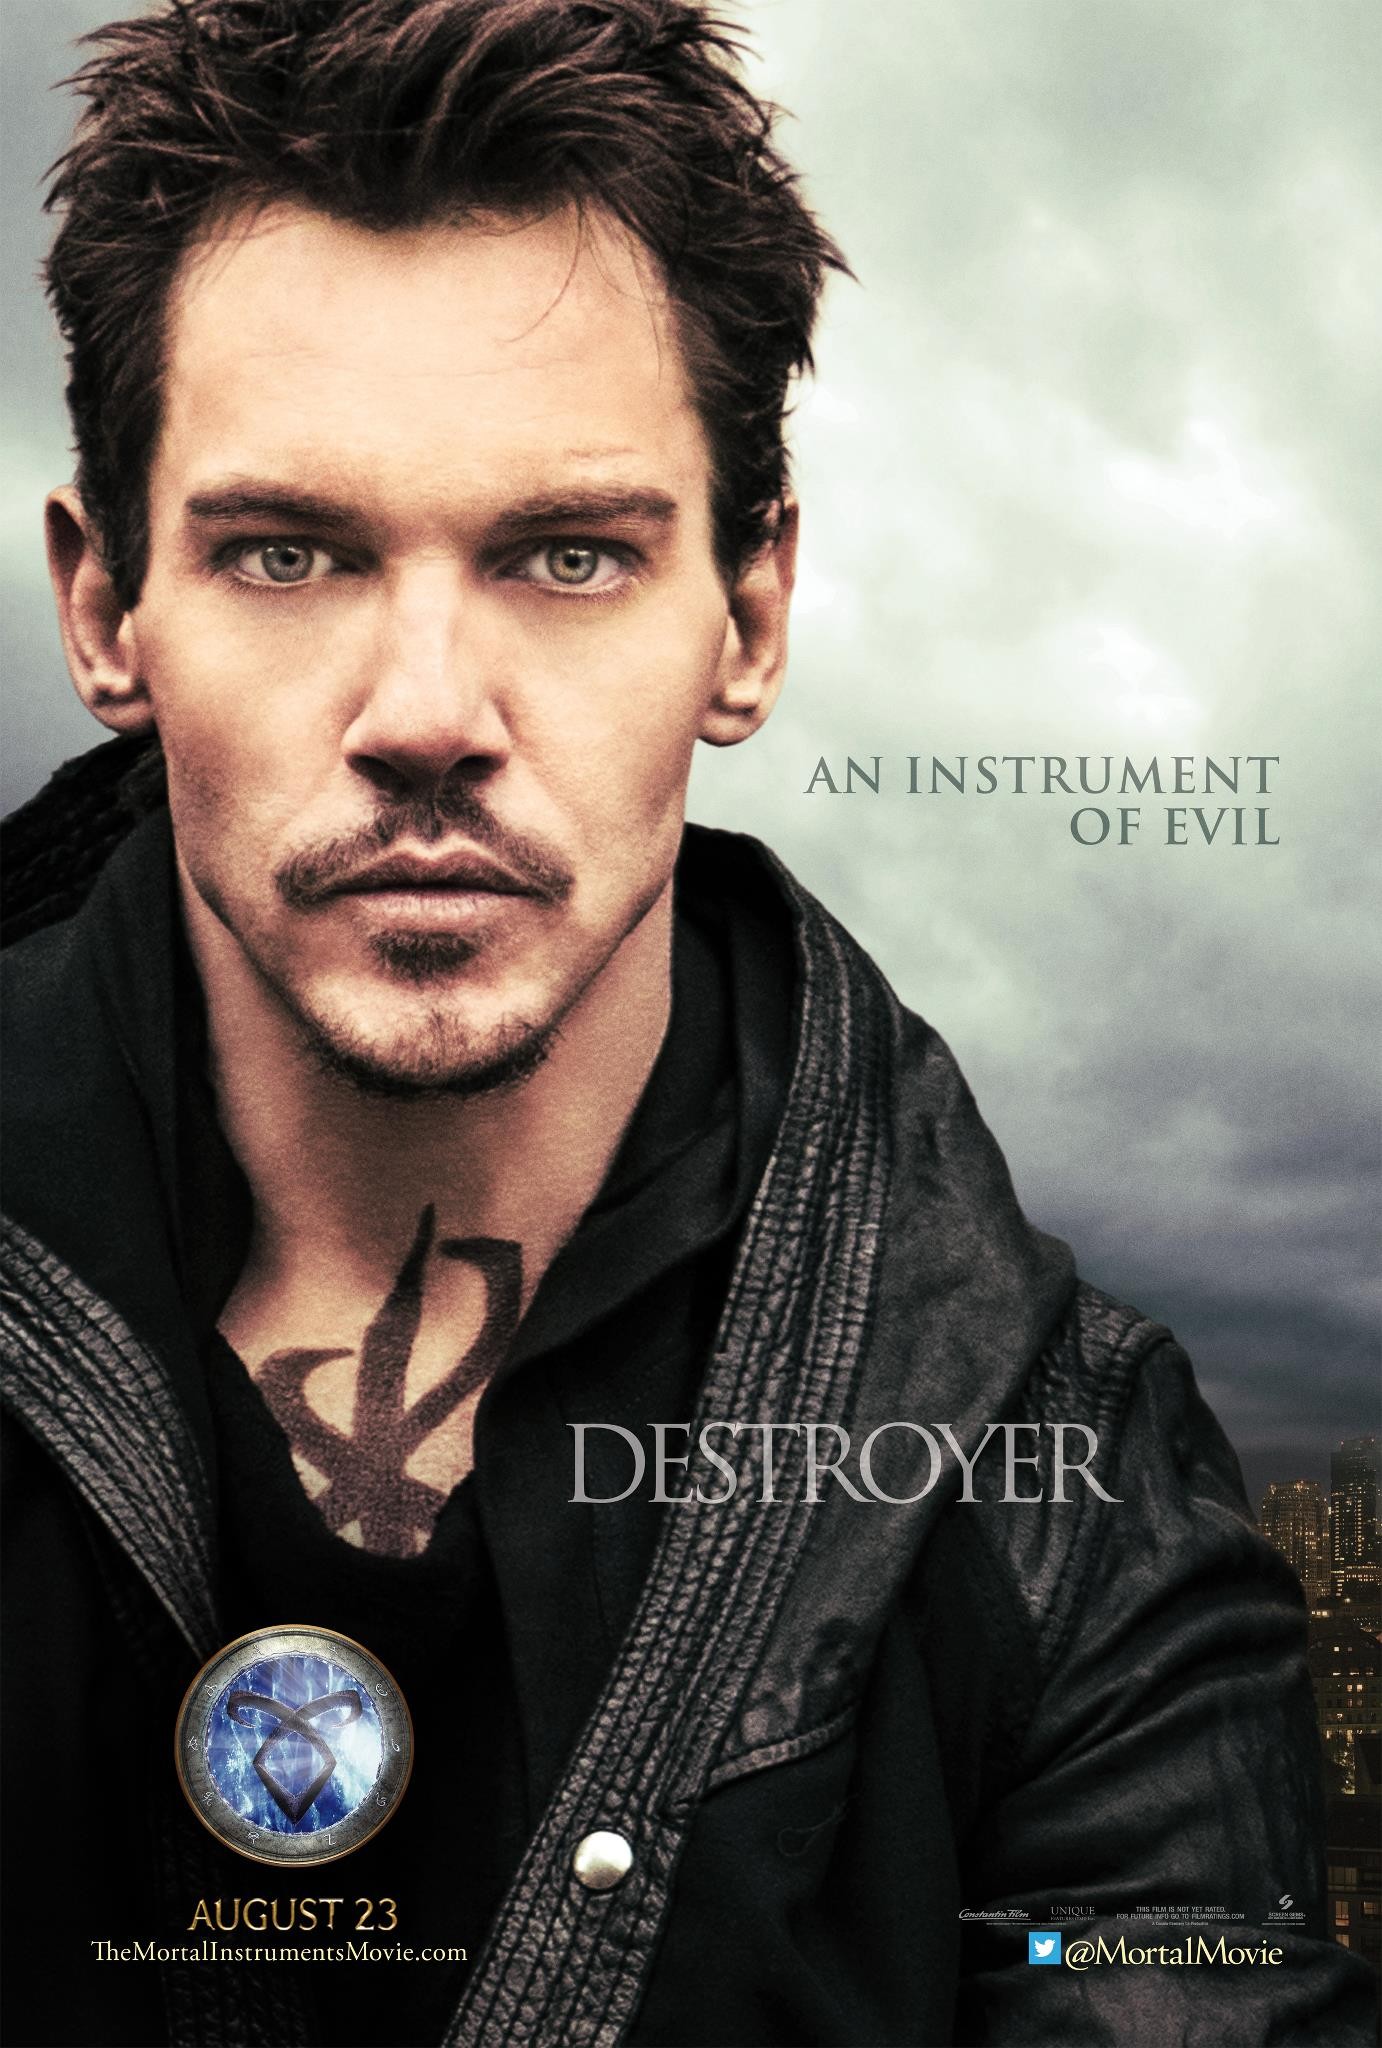 Mega Sized Movie Poster Image for The Mortal Instruments: City of Bones (#6 of 15)